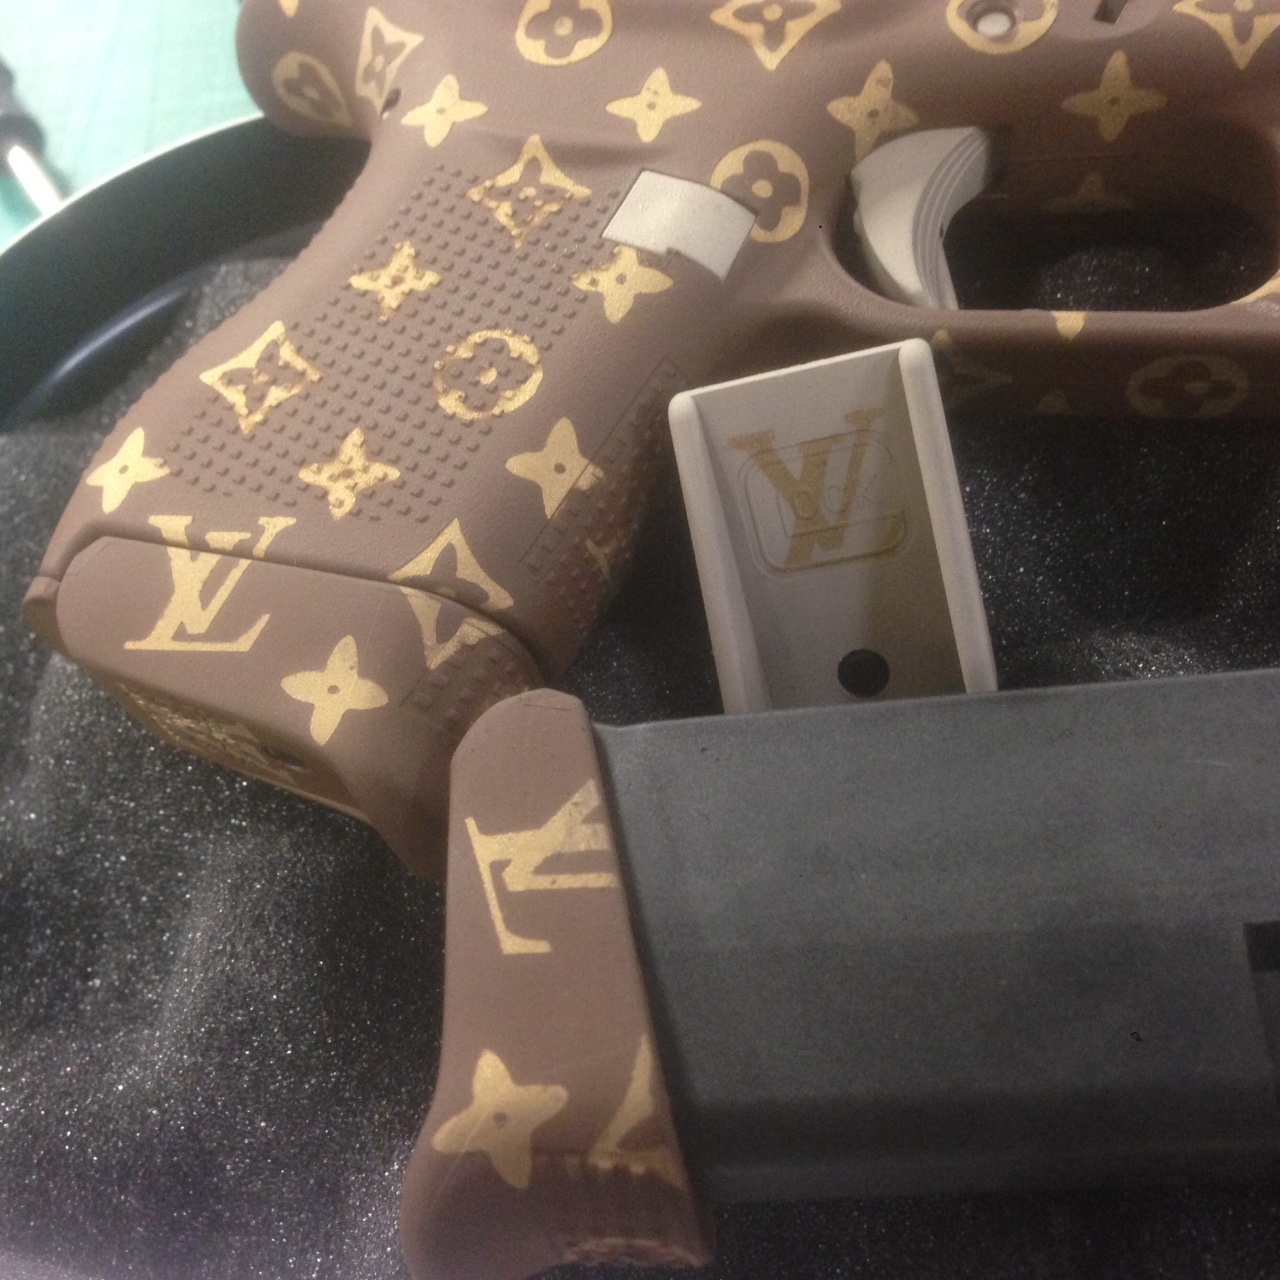 HERITAGE COLLECTABLES: Louis Vuitton Glock C19 9MM